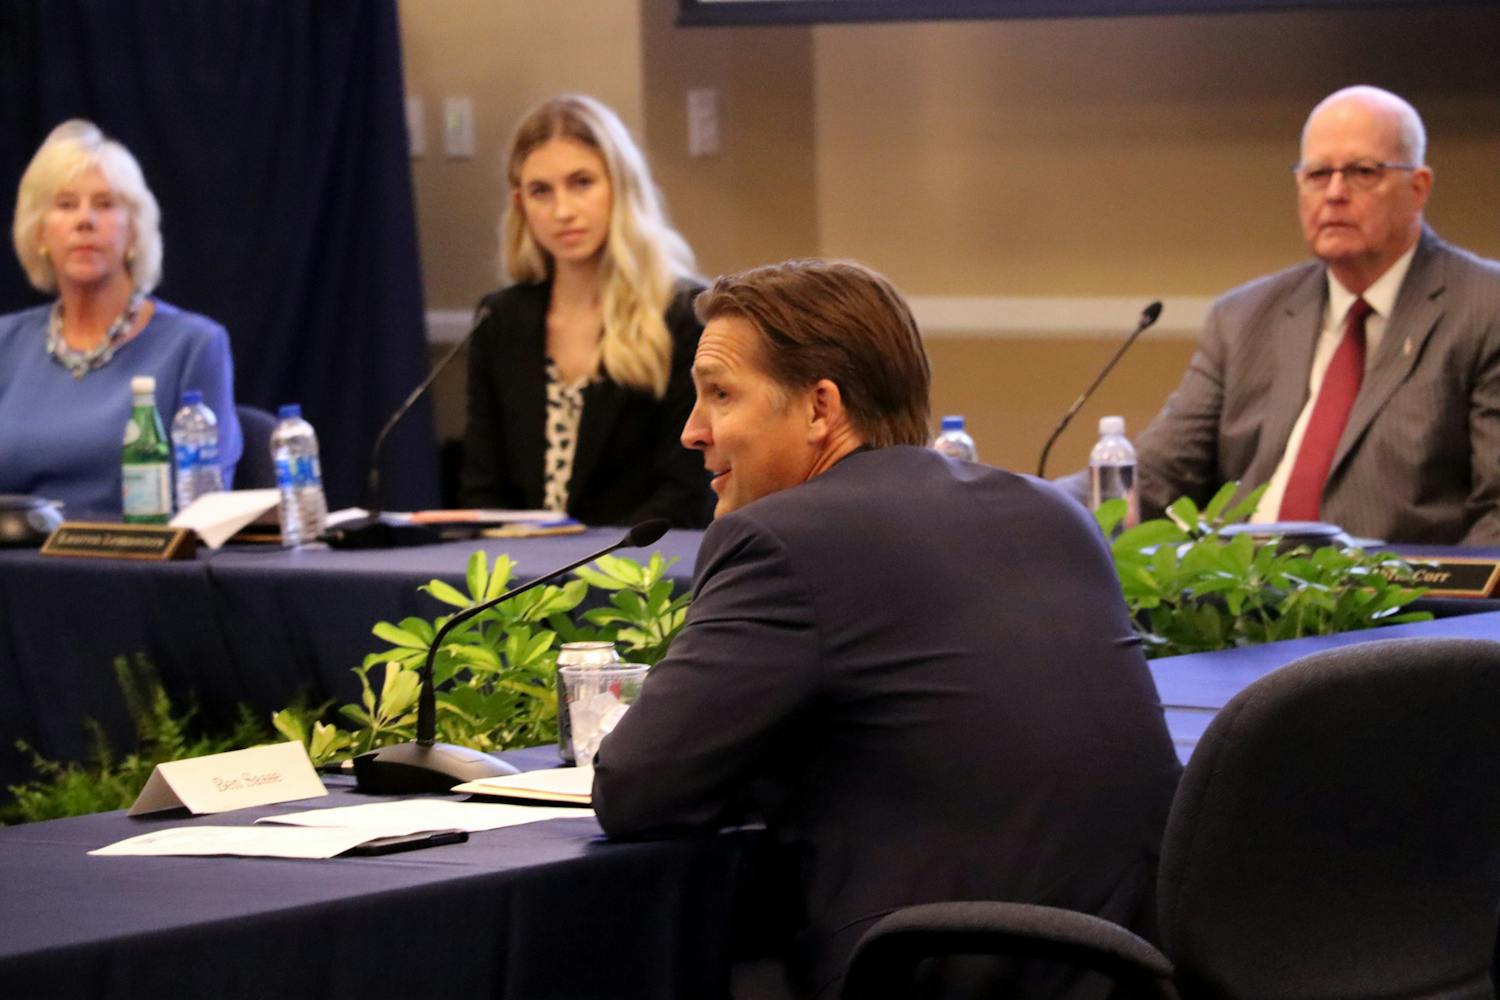 U.S. Sen. Ben Sasse, R-Nebraska, returned to UF campus Tuesday to be interviewed by the Board of Trustees. If selected, Sasse will succeed President Kent Fuchs as UF’s 13th president.&nbsp;